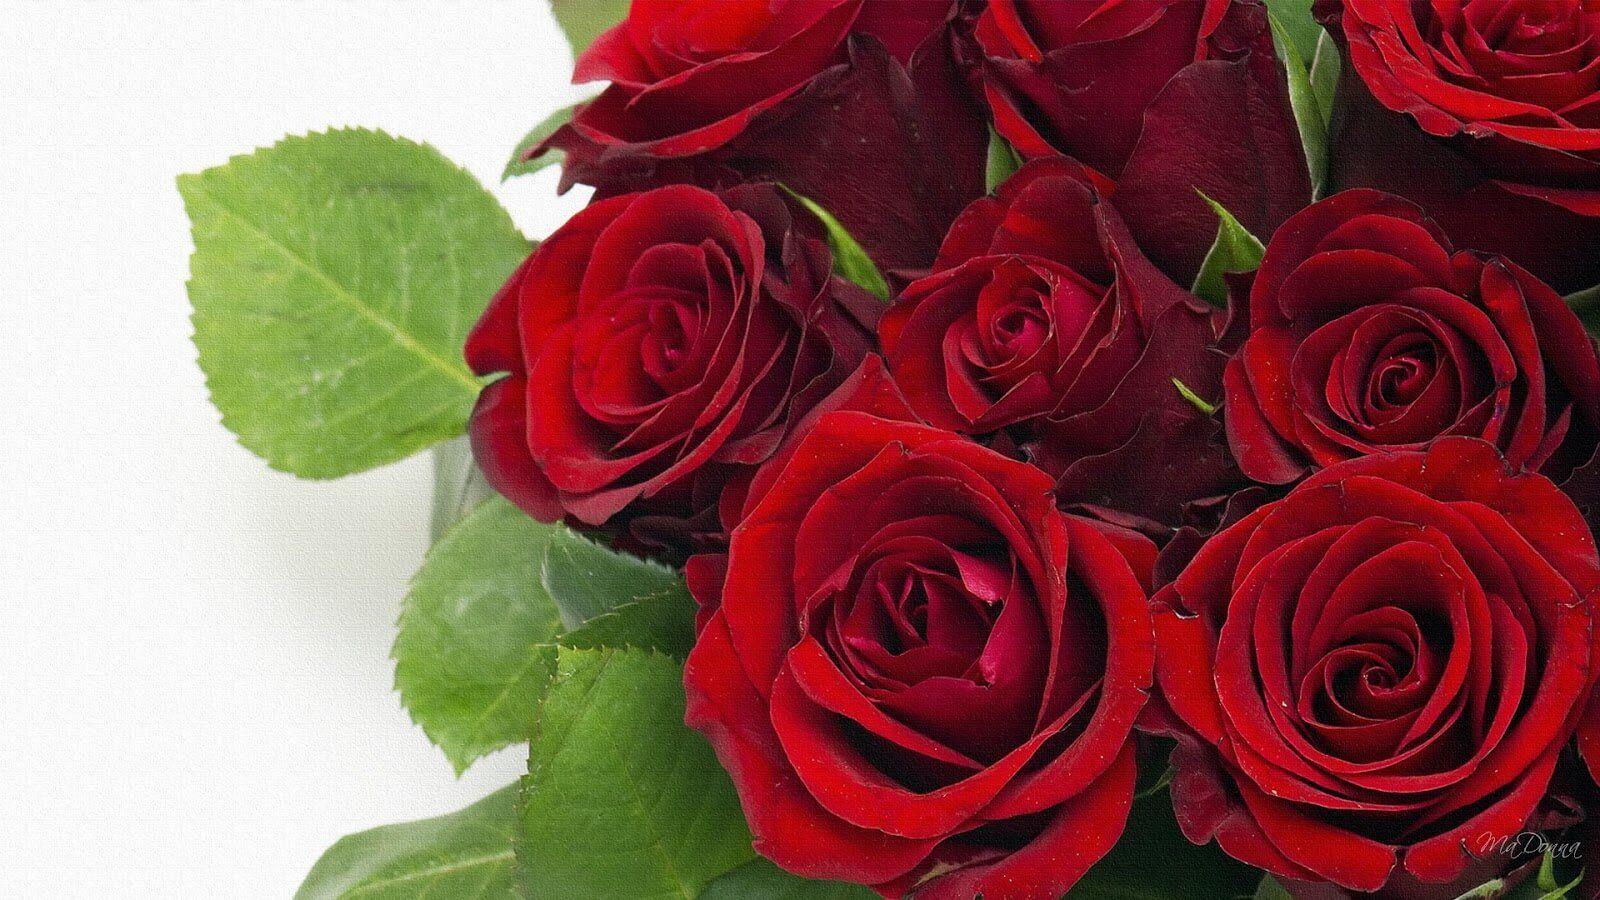 Happy Valentines Day 2017 Image: Red Roses Picture